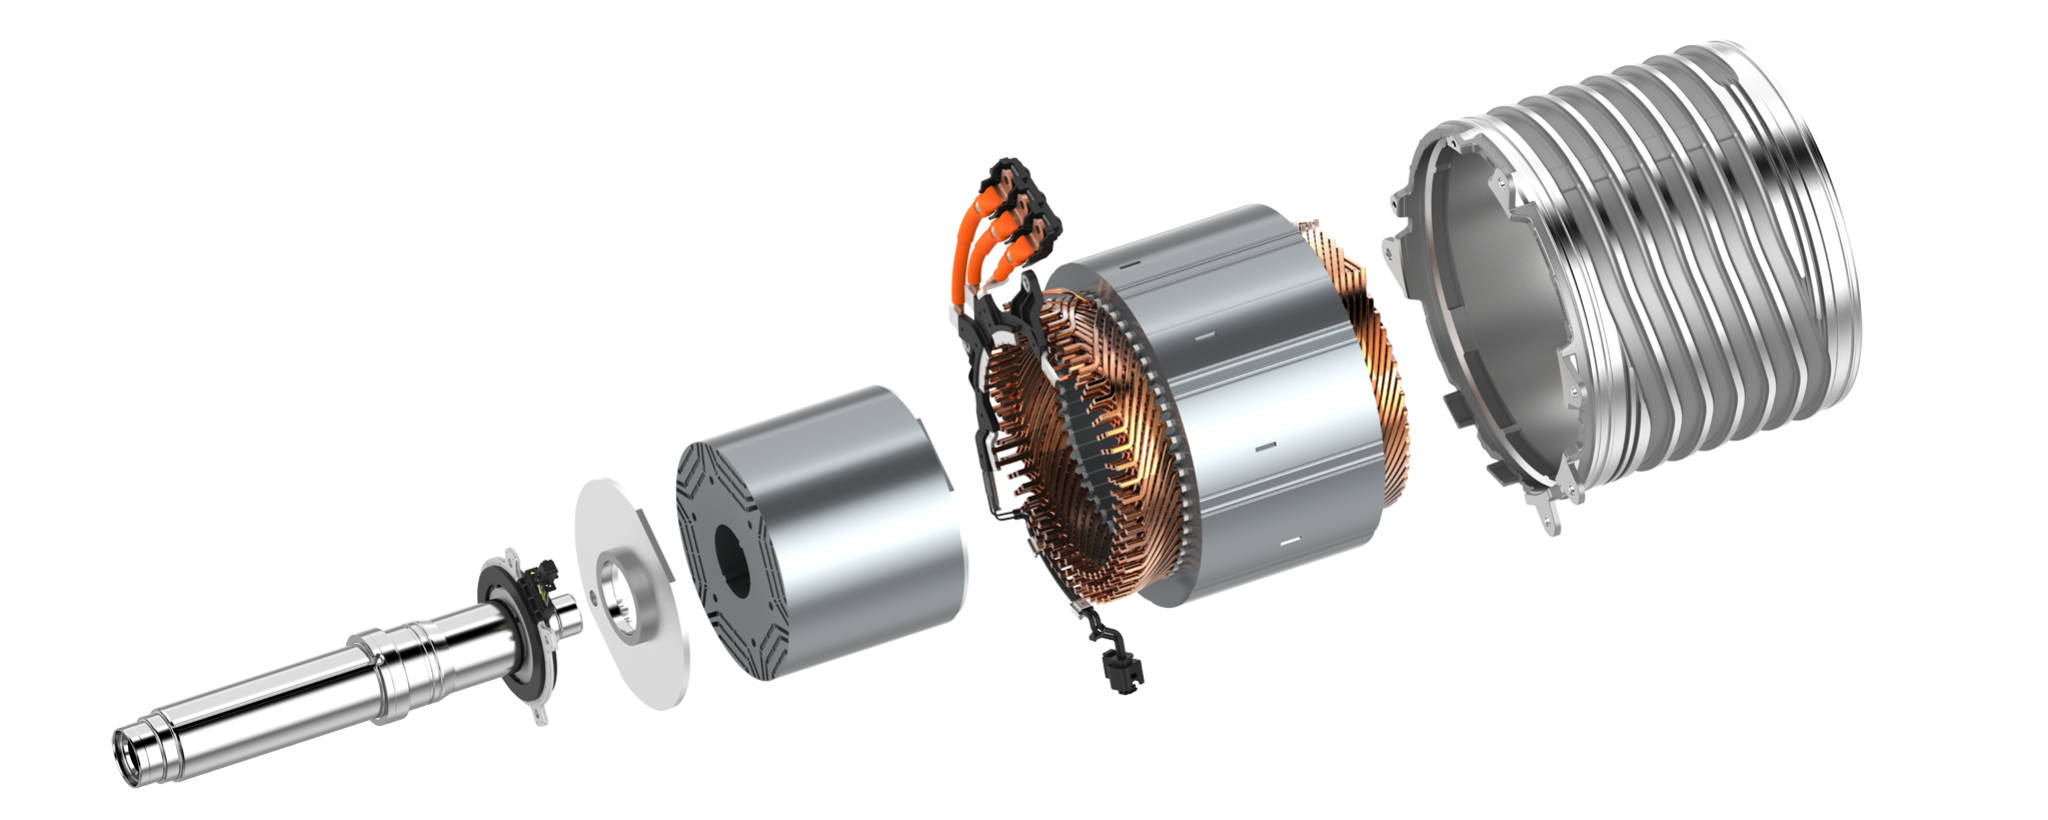 Electric motors from ZF: Totally ready for all drives - ZF